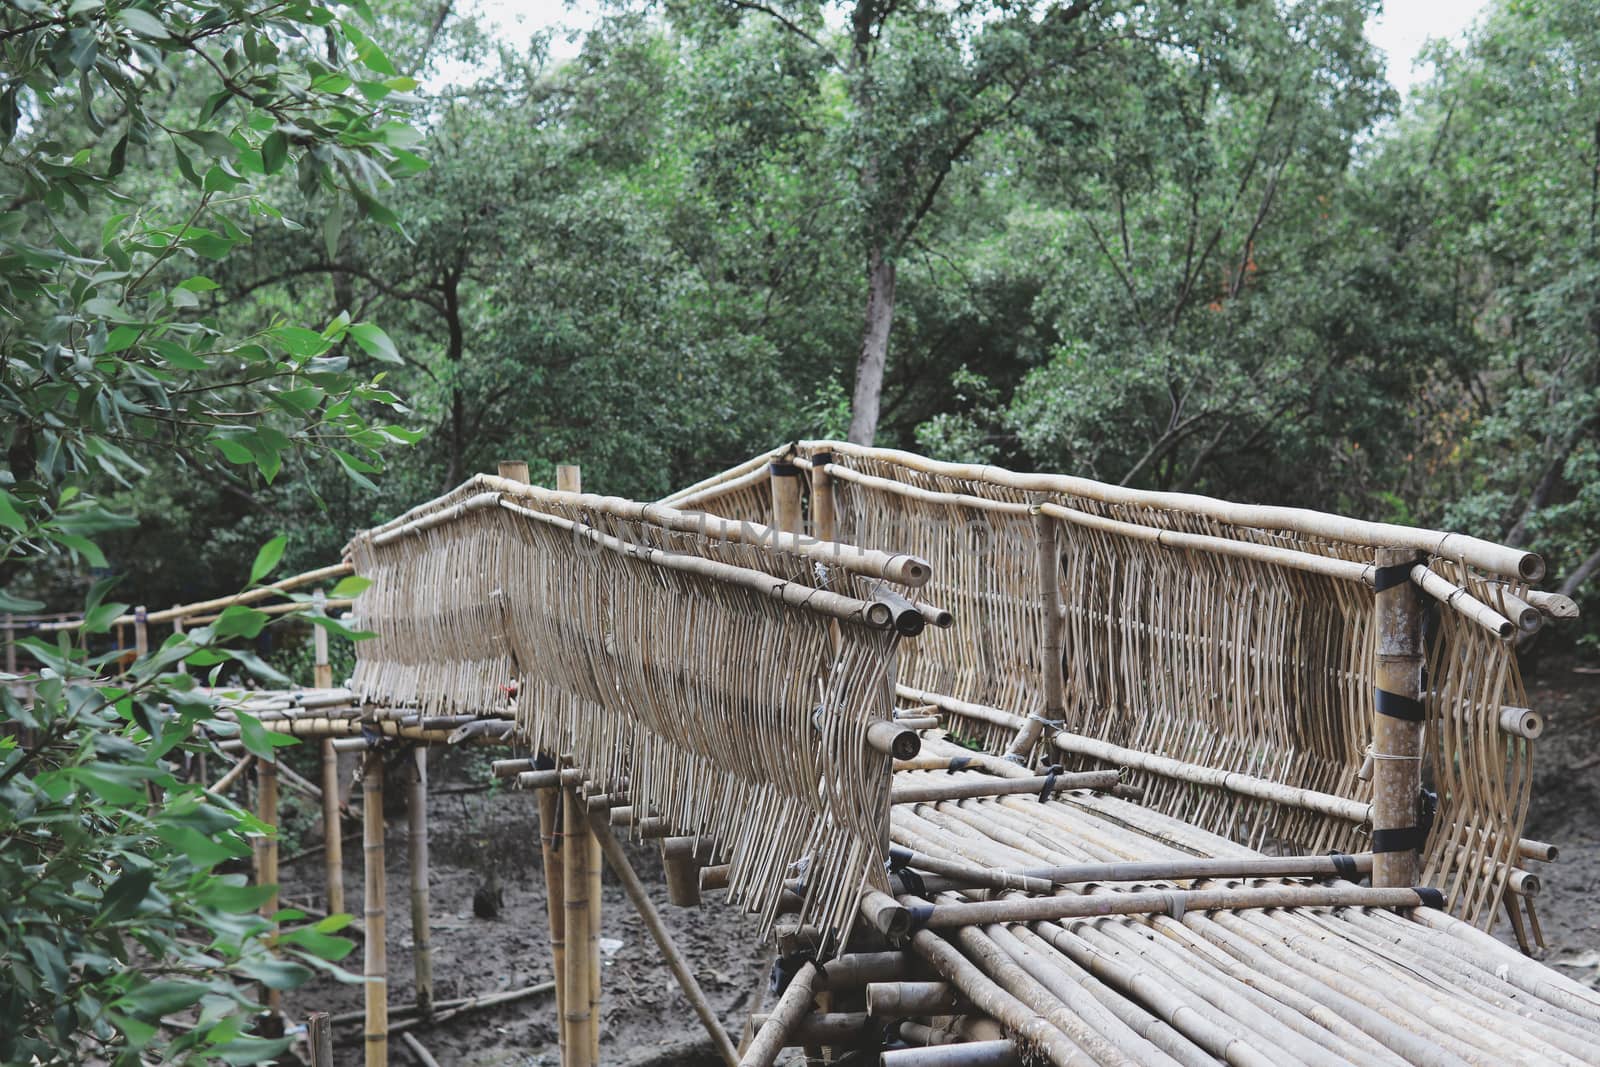 Bamboo bridge built in the forest. Travel by the coast To travel and watch nature